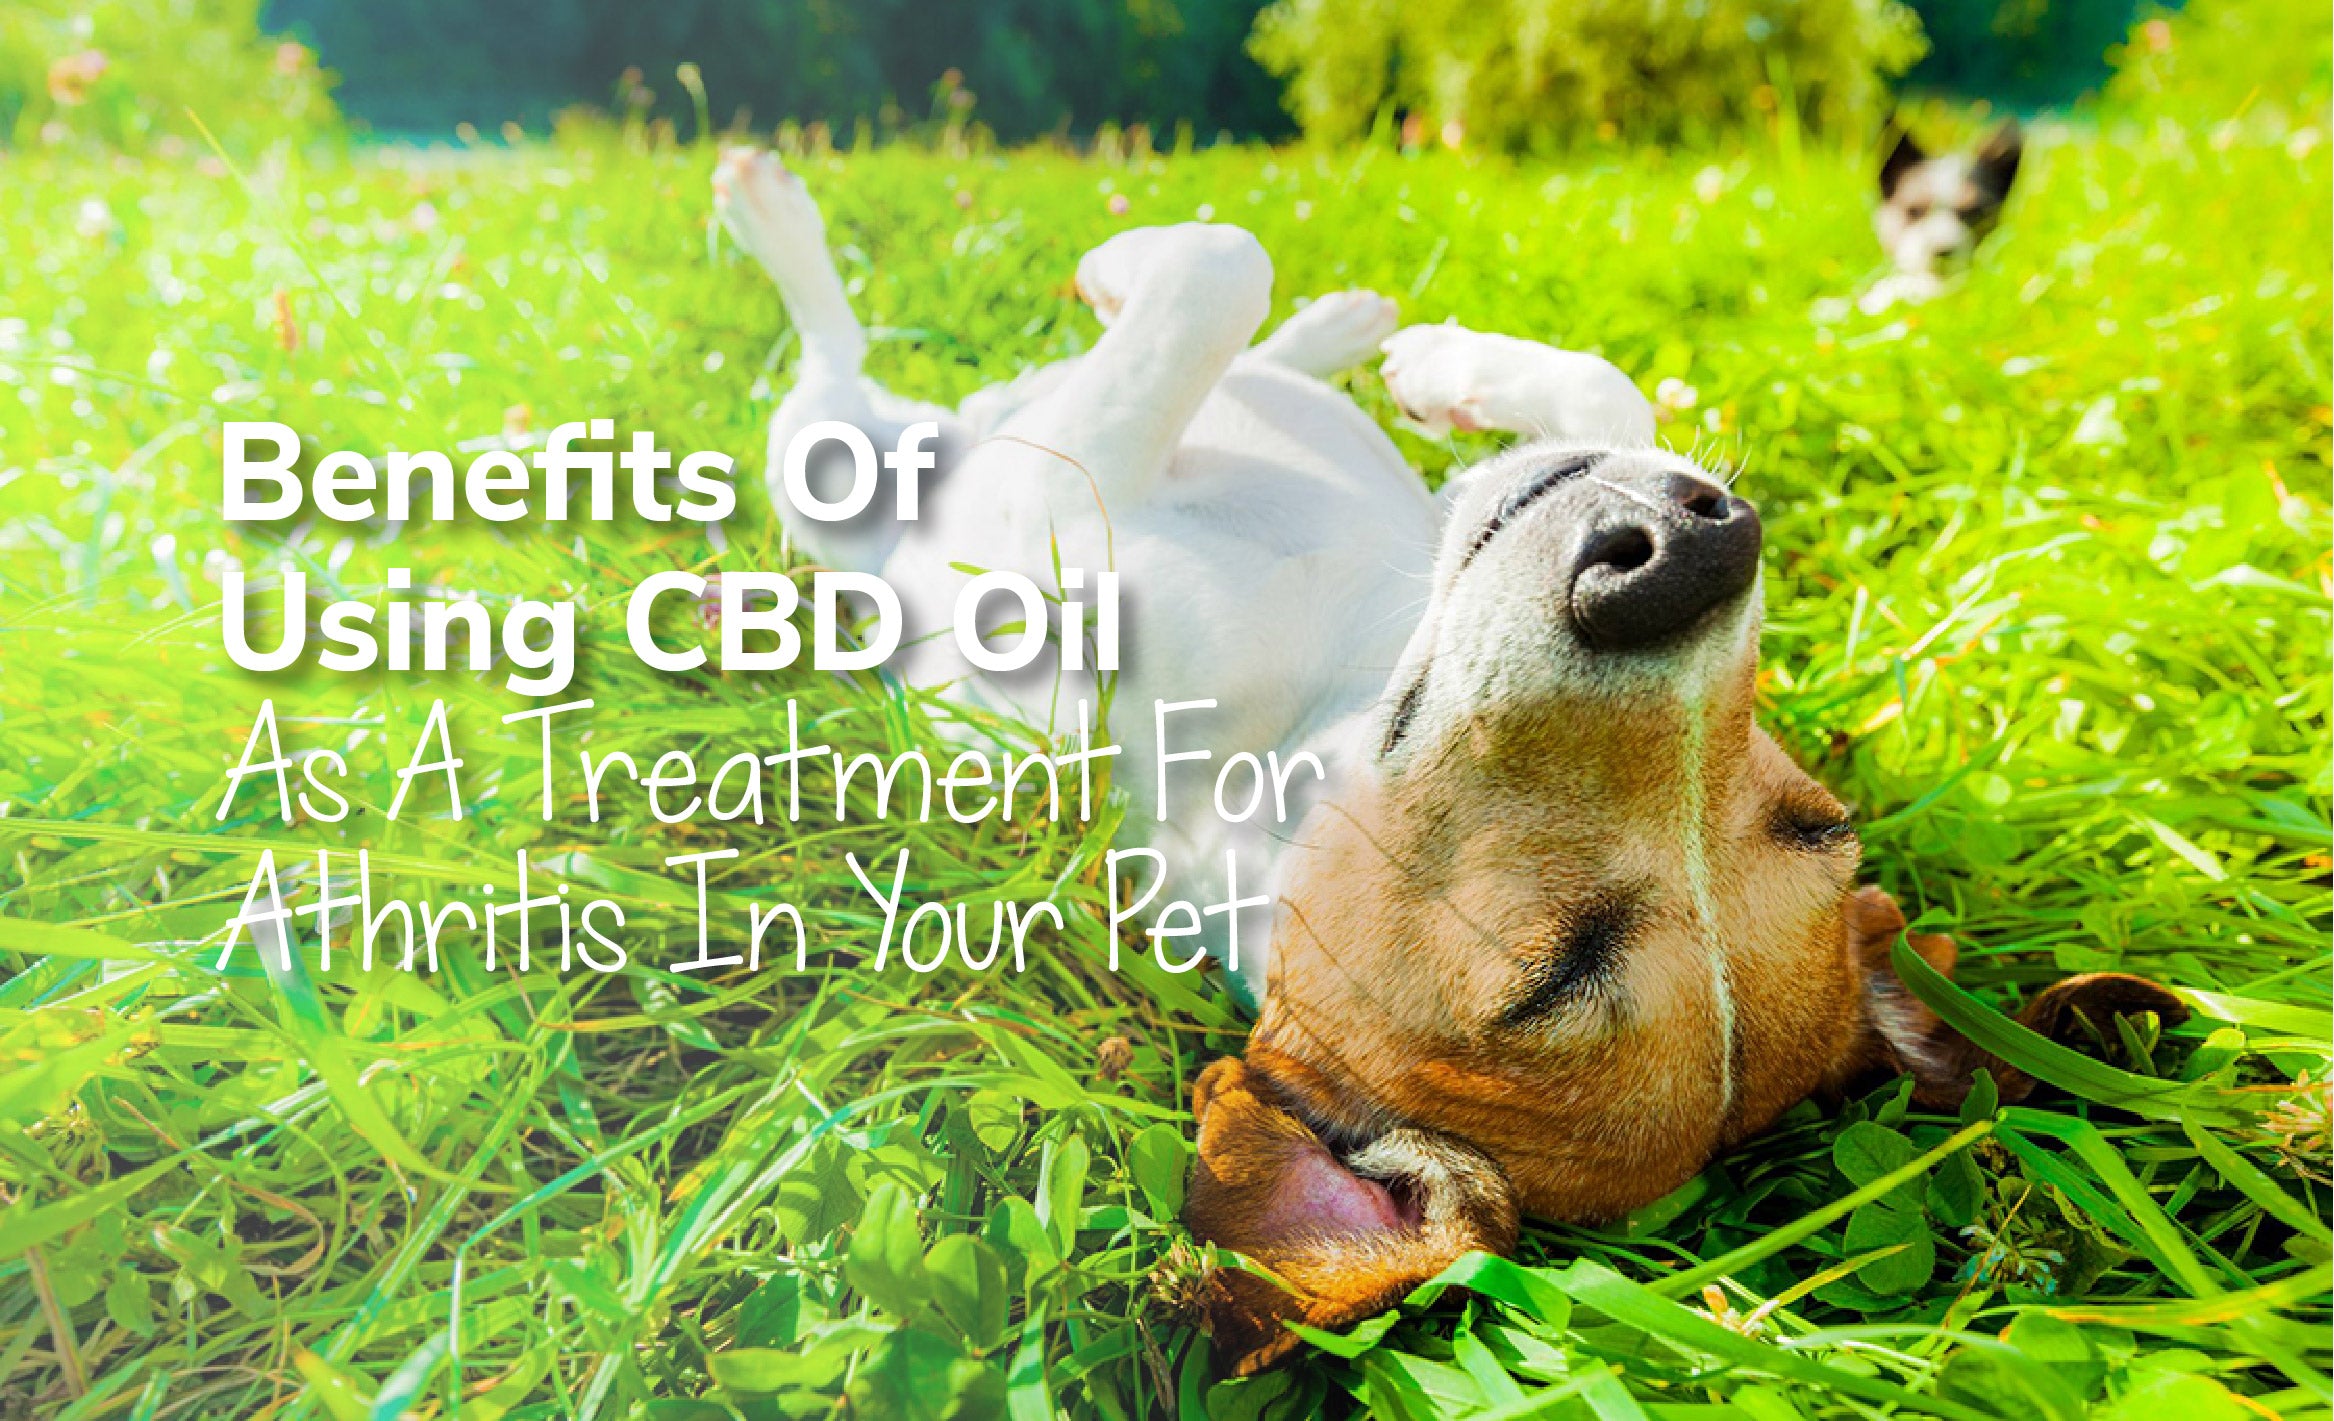 Benefits Of Using CBD Oil As A Treatment For Arthritis In Your Pet